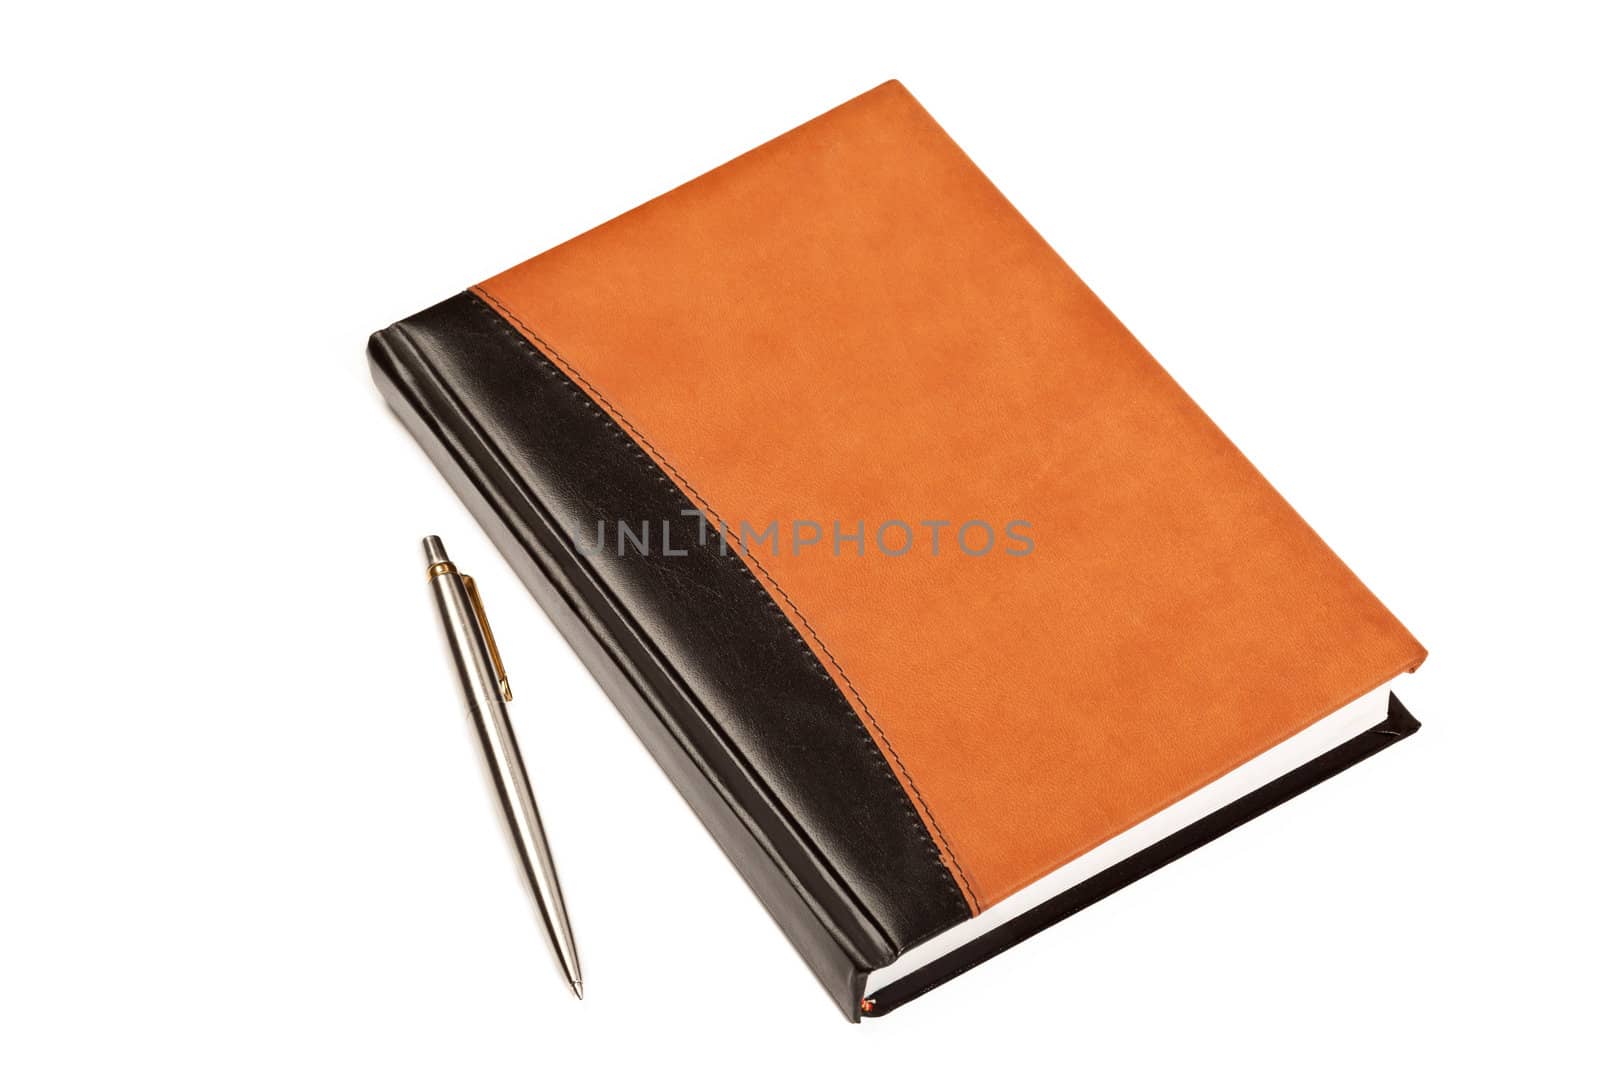 Diary with leather cover and metal pen on table isolated on white background